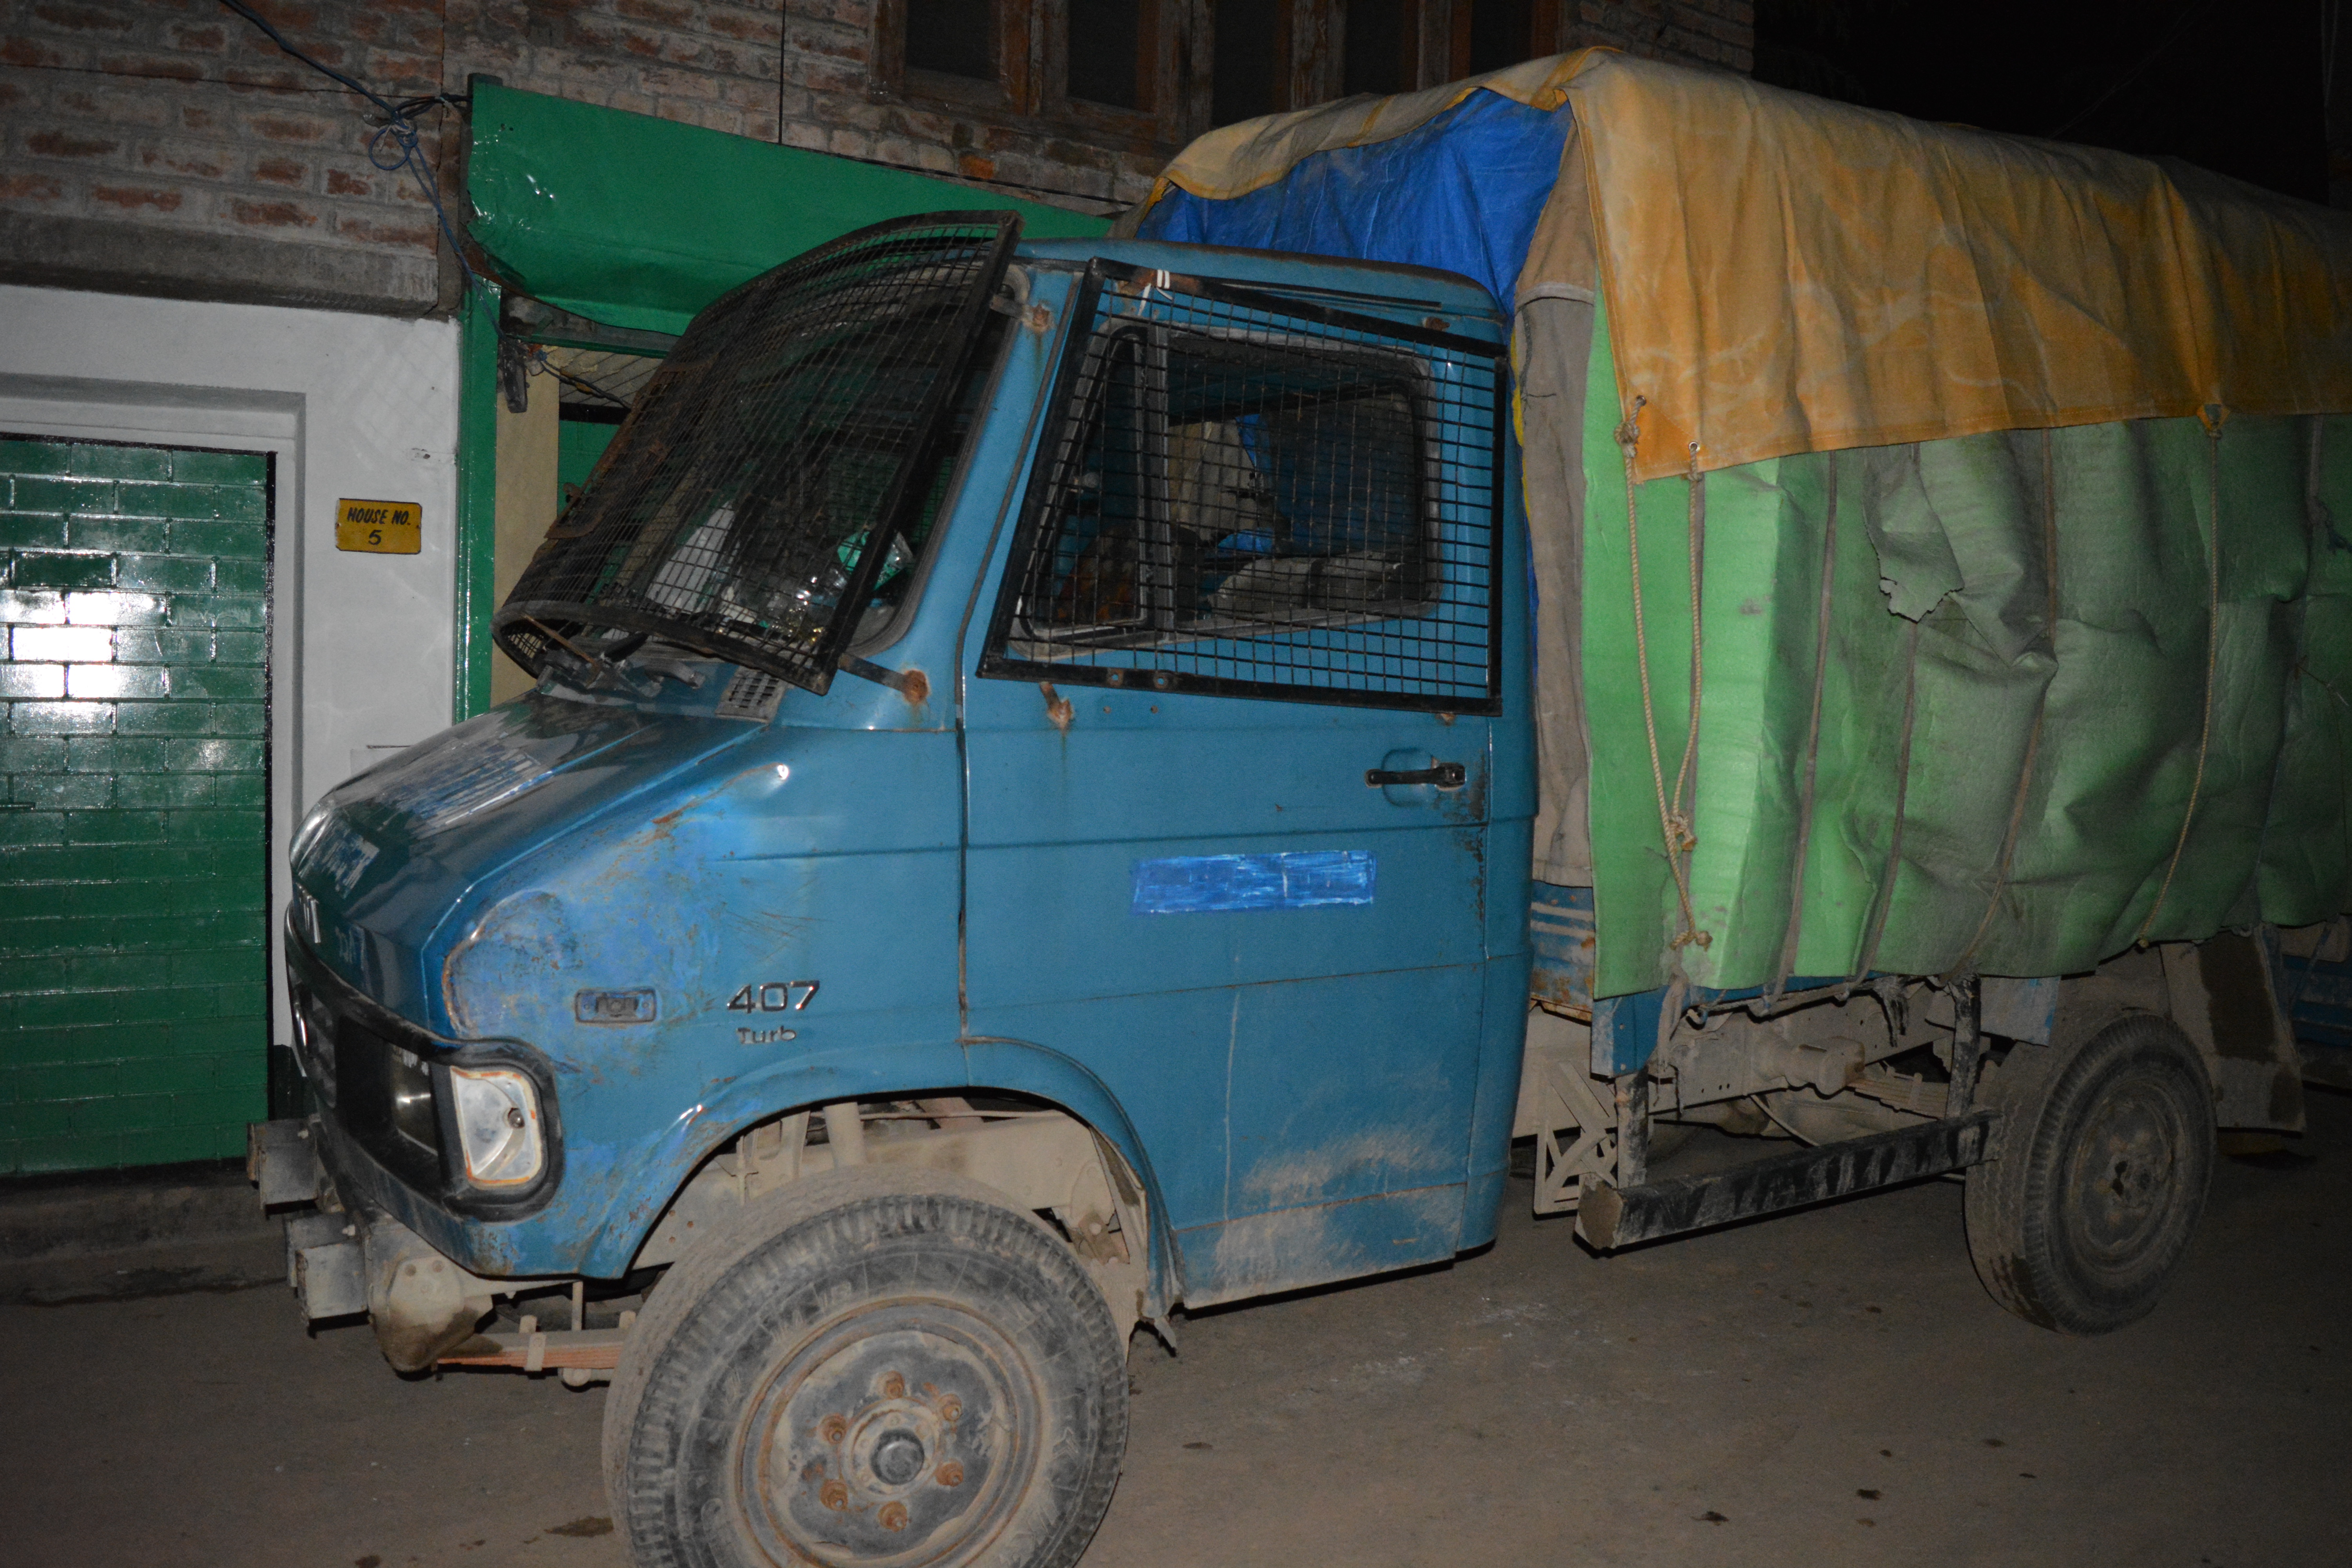 Police vehicle outside the residence of Syed Ali Geelani. (A file photo)